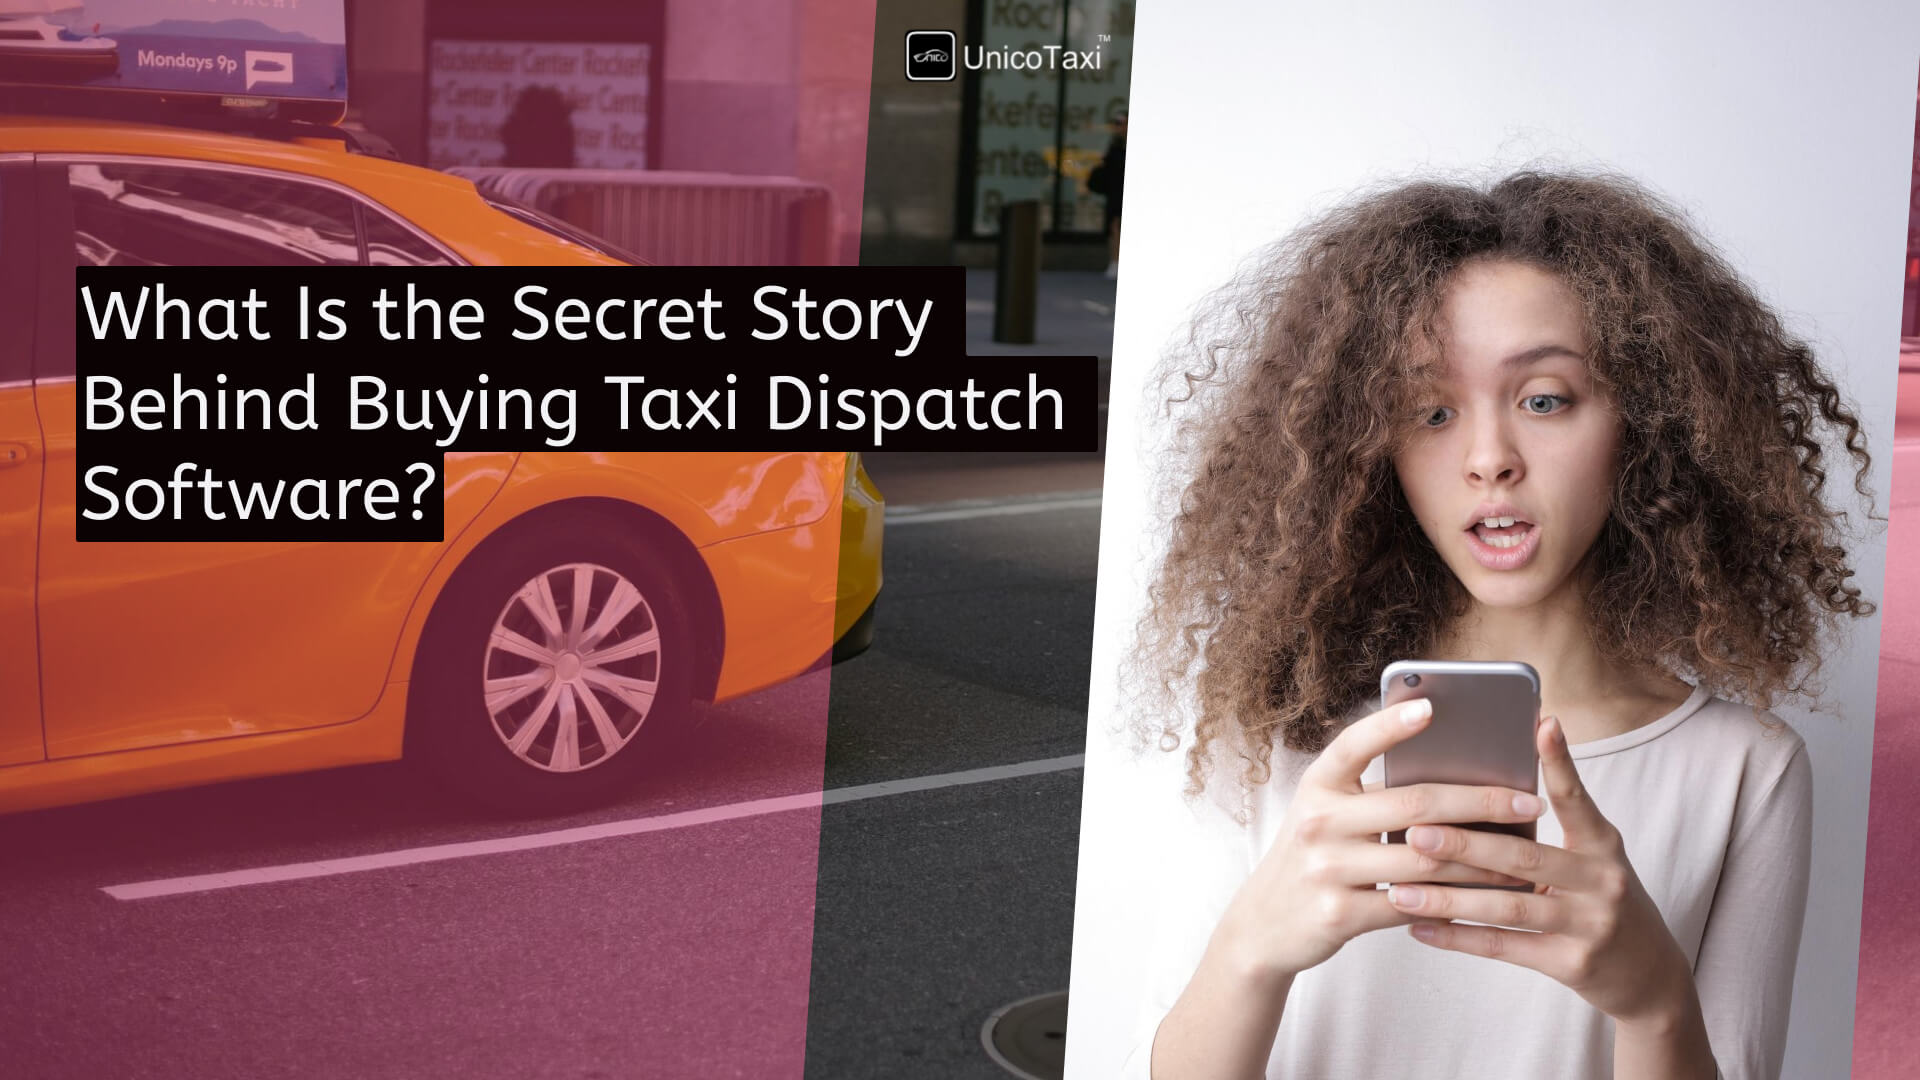 What Is the Secret Story Behind Buying Taxi Dispatch Software With Smart Apps?